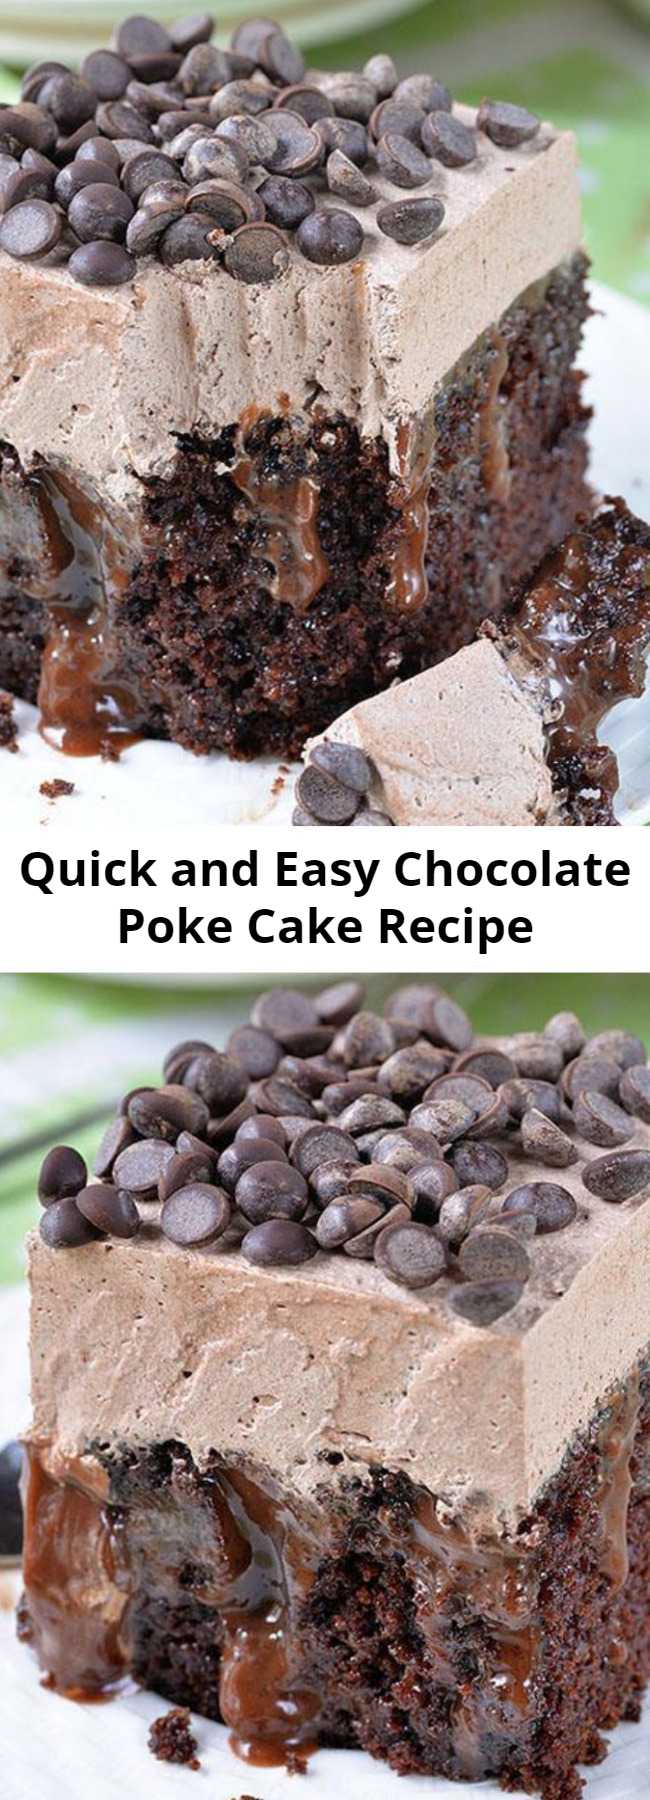 Quick and Easy Chocolate Poke Cake Recipe - Chocolate Poke Cake is quadruple chocolate treat-rich chocolate cake infused with delicious mixture of melted chocolate and sweetened condensed milk, topped with chocolate whipped cream and chocolate chips.